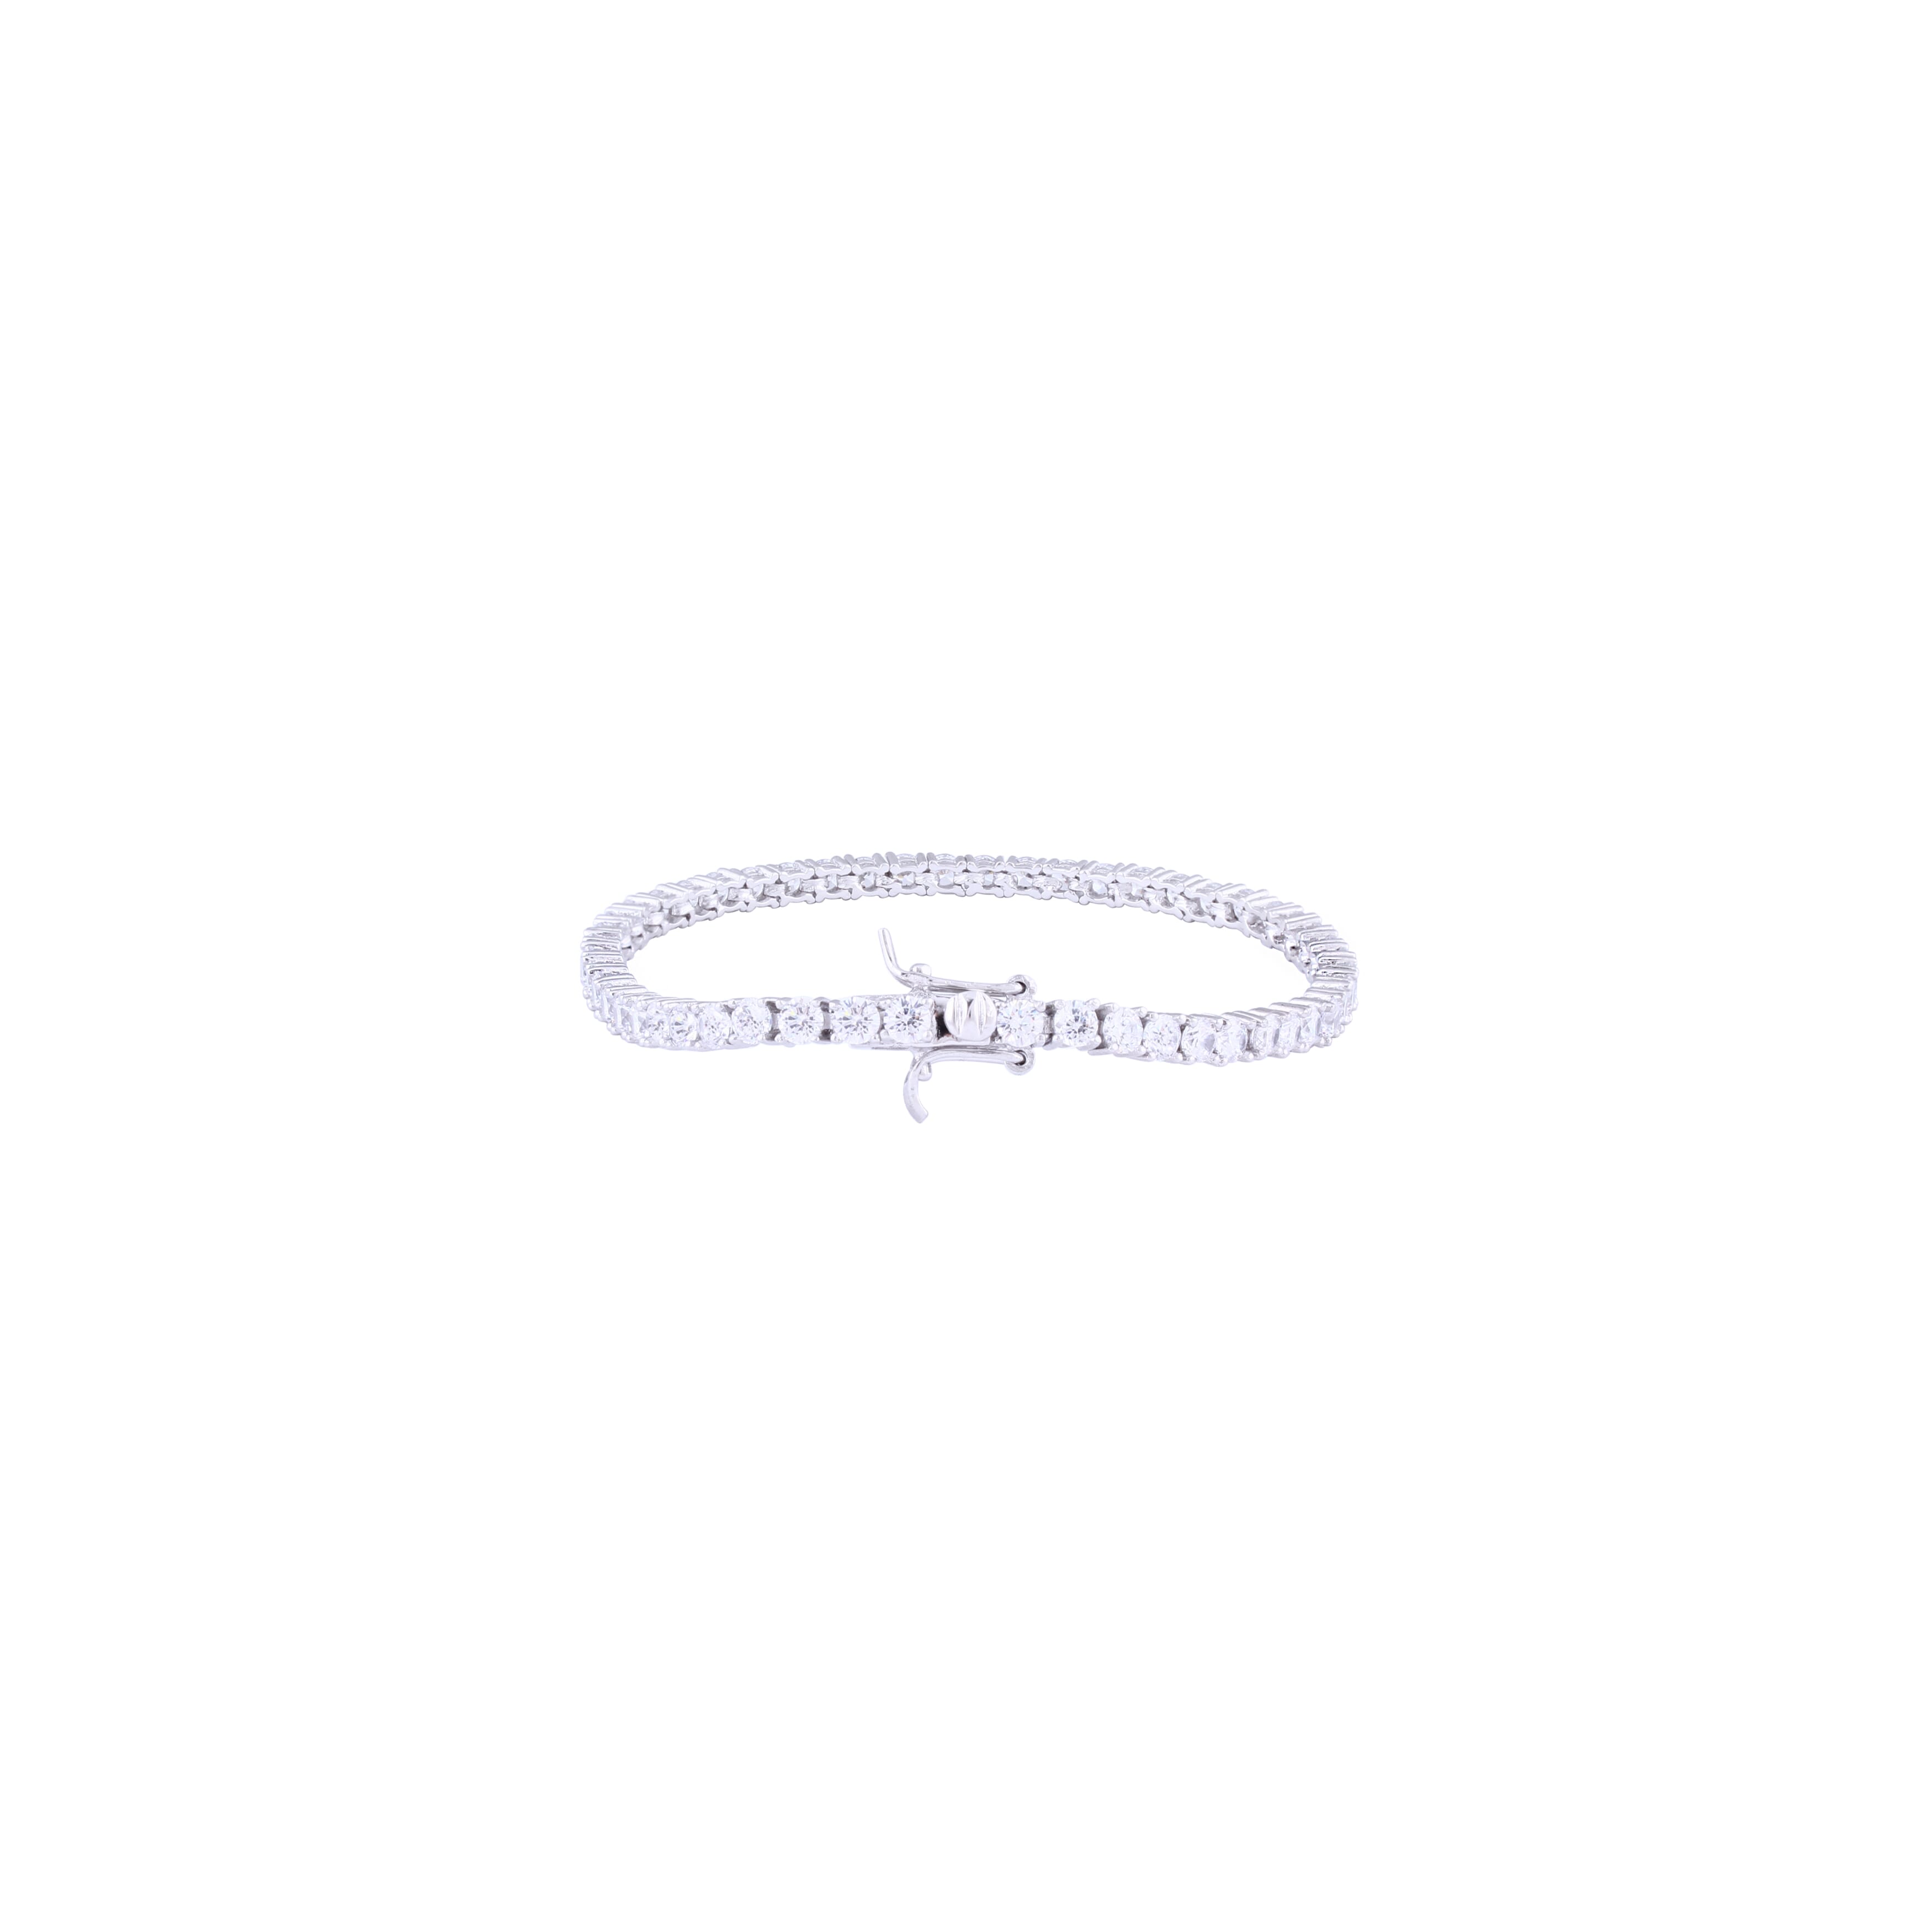 Asfour Crystal 925 Sterling Silver Tennis Bracelet With Round Stones